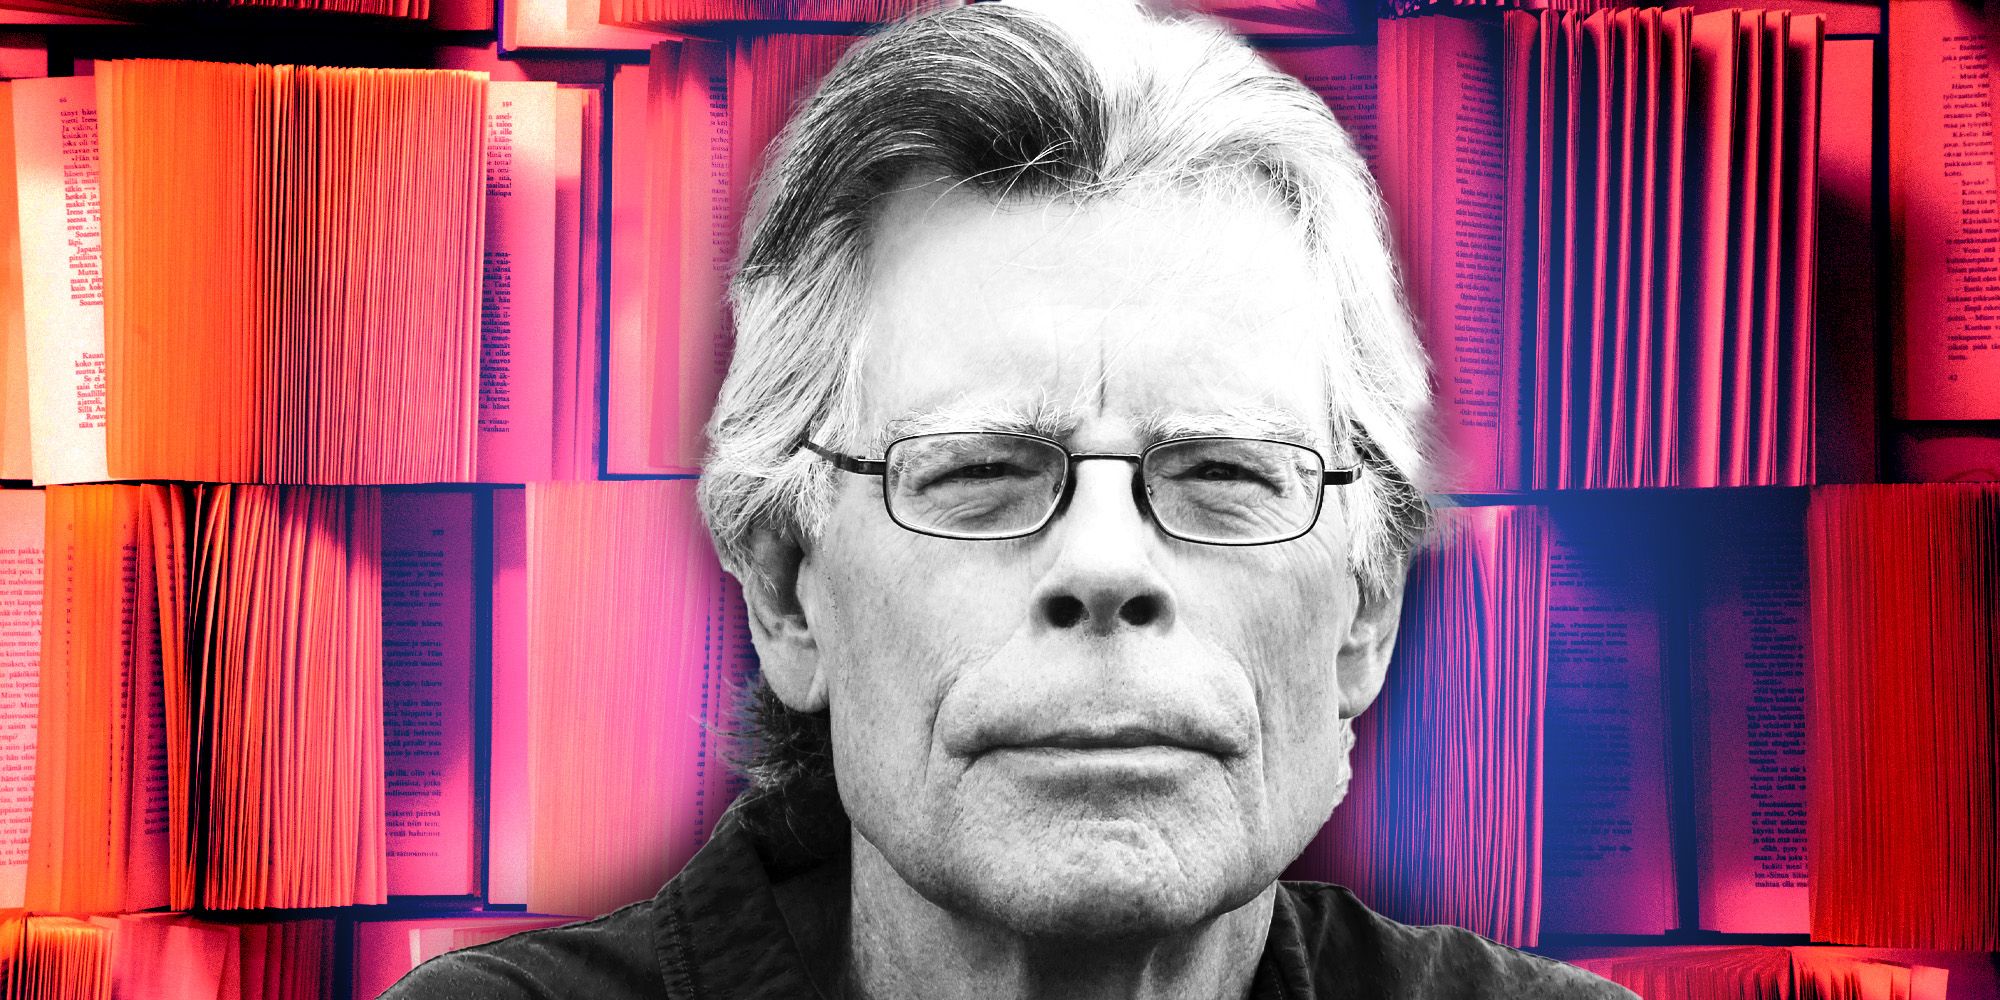 1 Stephen King Fantasy Book Could Be The Next Game Of Thrones (If Handled Correctly)